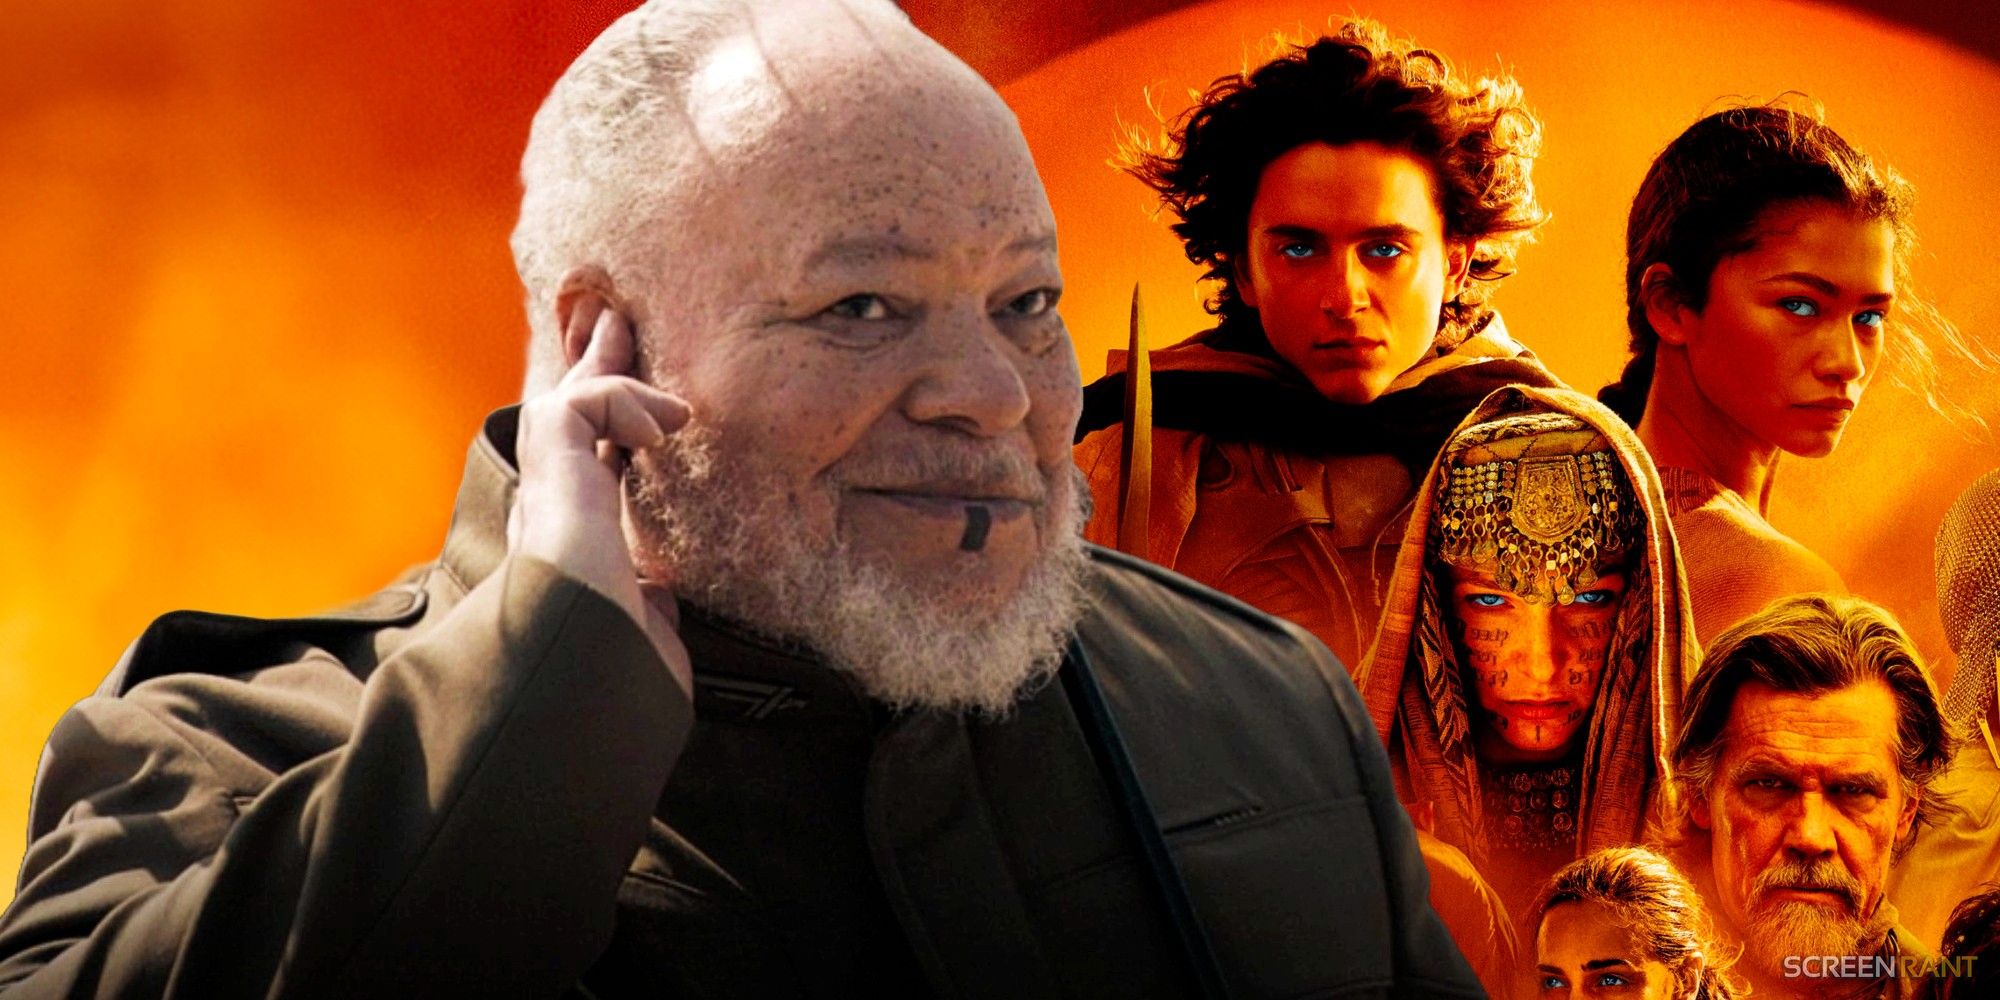 Stephen McKinley Henderson as Thufir Hawat in Dune and the cast of Dune 2